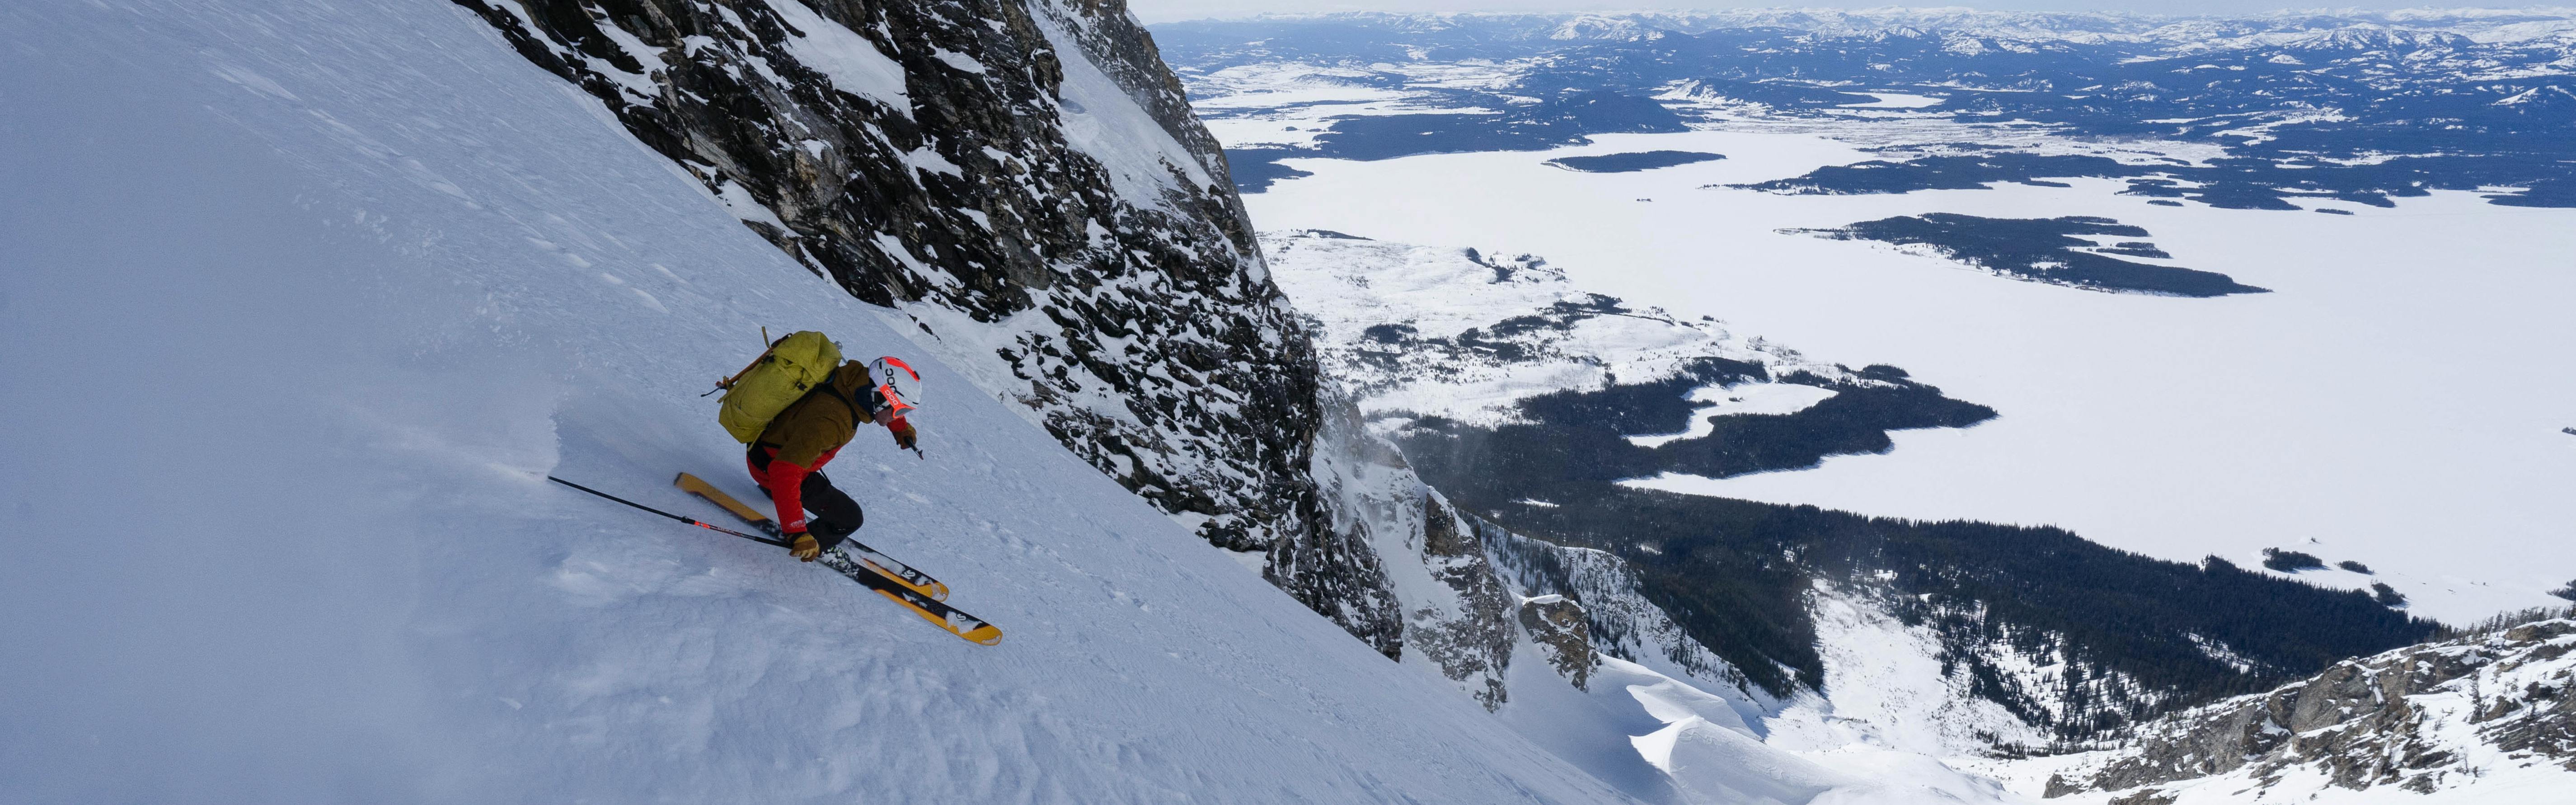 A skier turning down a steep, snowy mountain. There are snowy mountains in the background. 